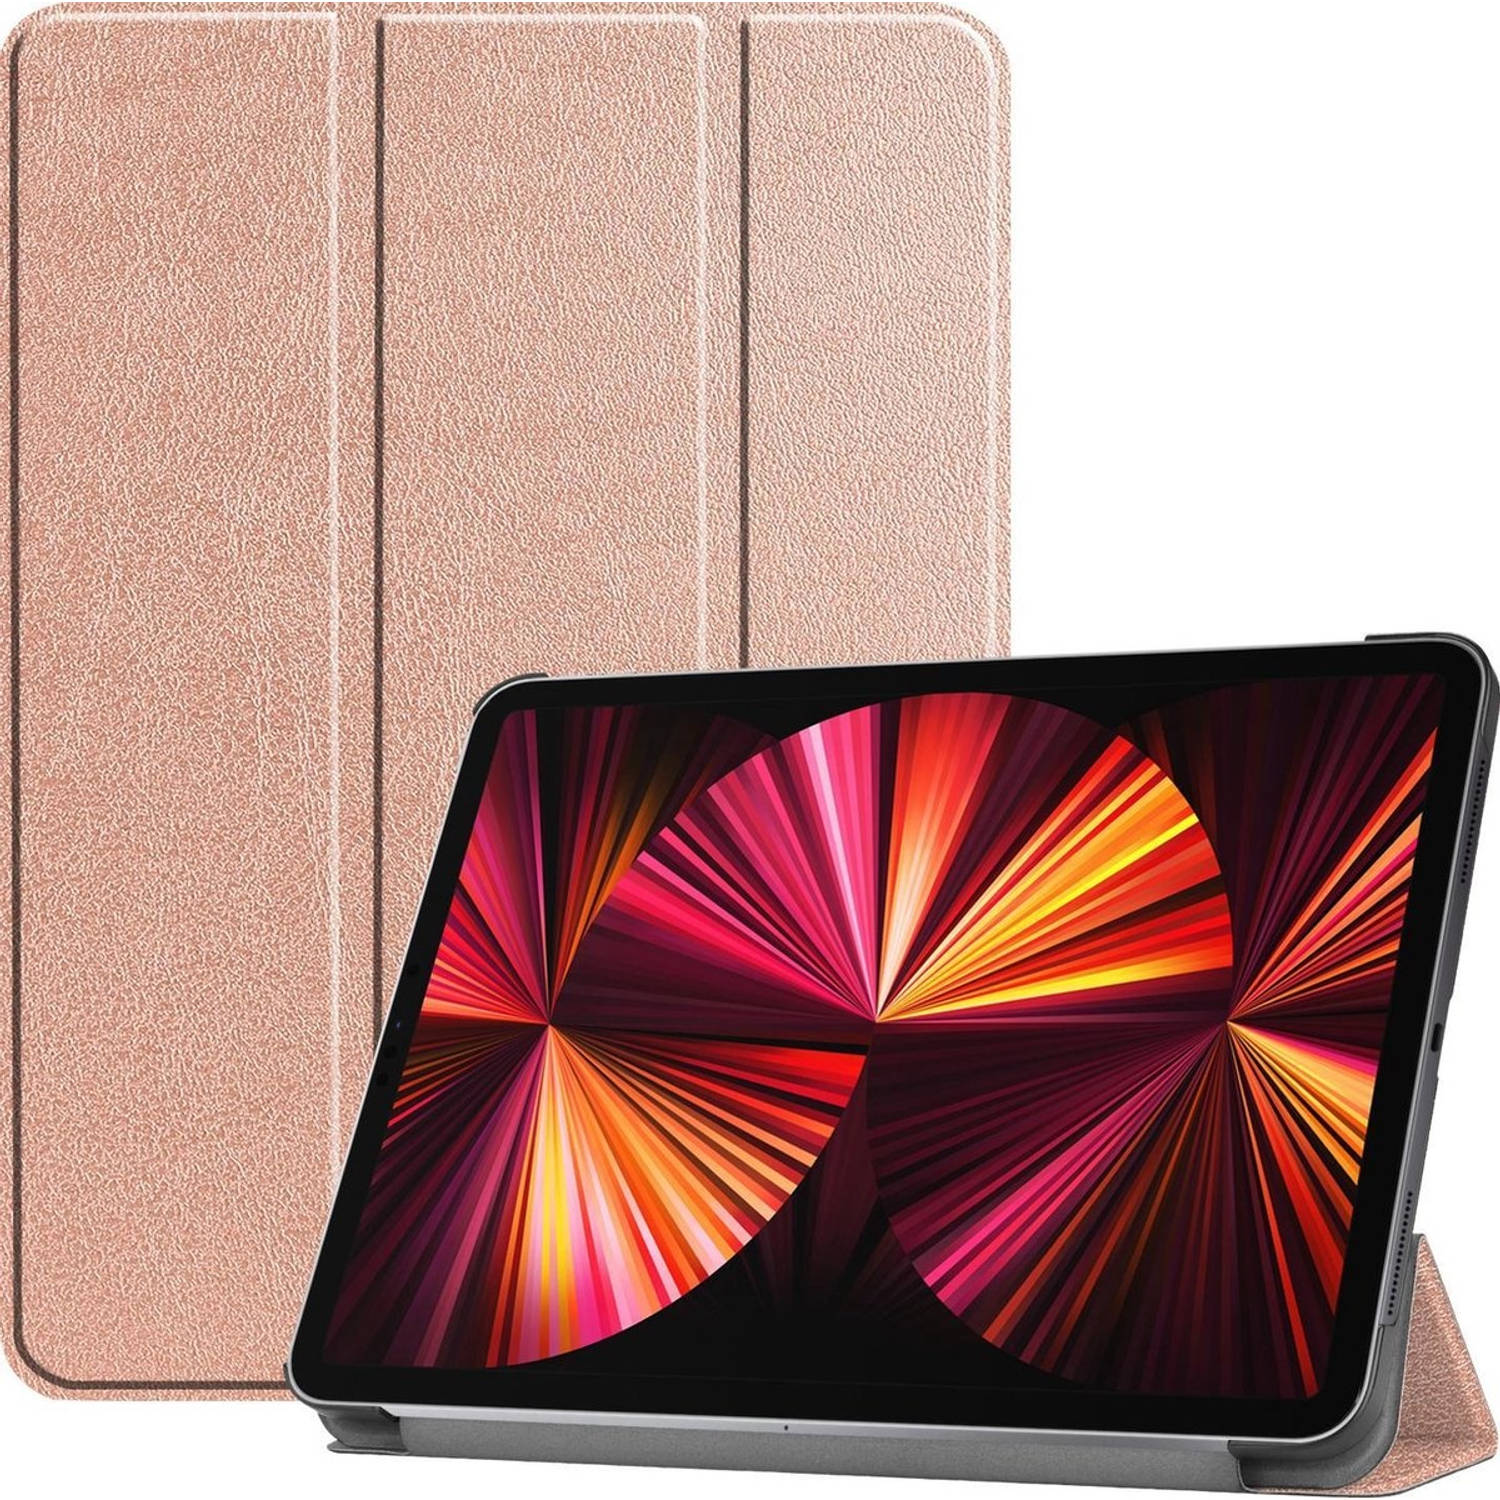 Basey Ipad Pro 2021 11 Inch Hoes Case Hoesje Rosé Goud Hardcover Book Case Cover